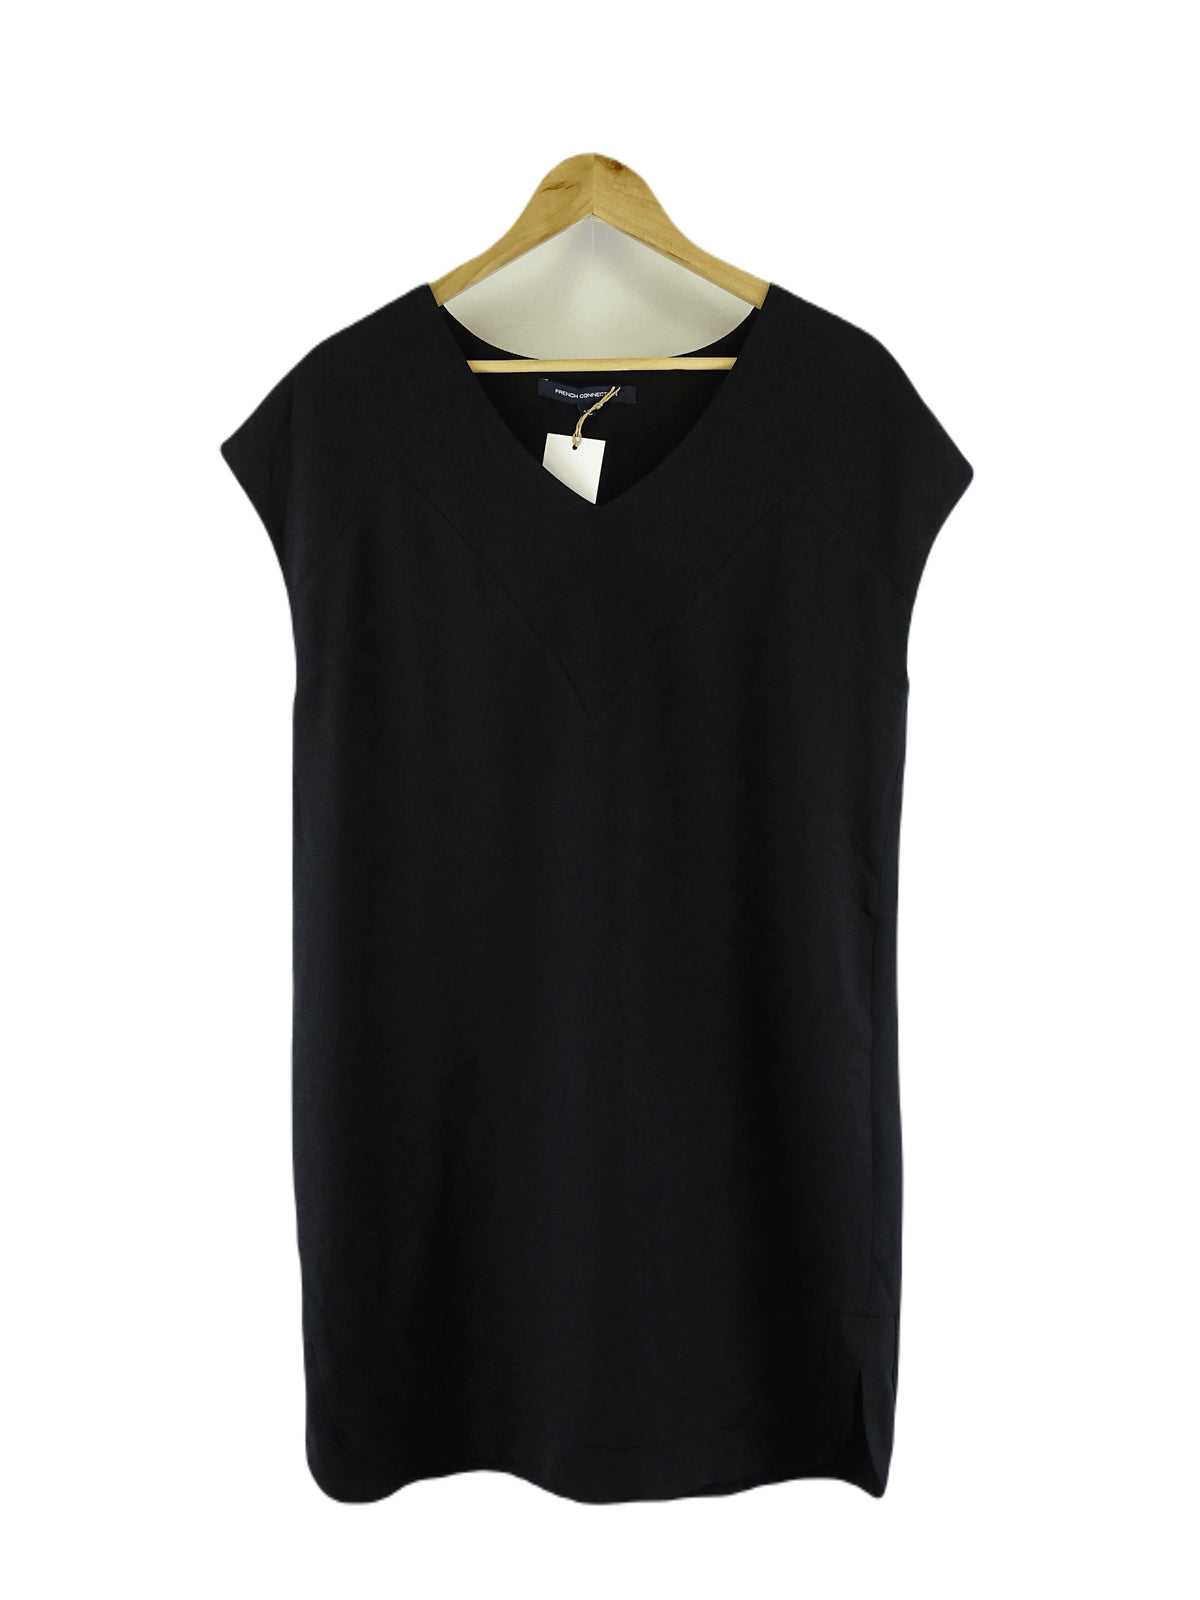 French Connection Black Shift Dress 12